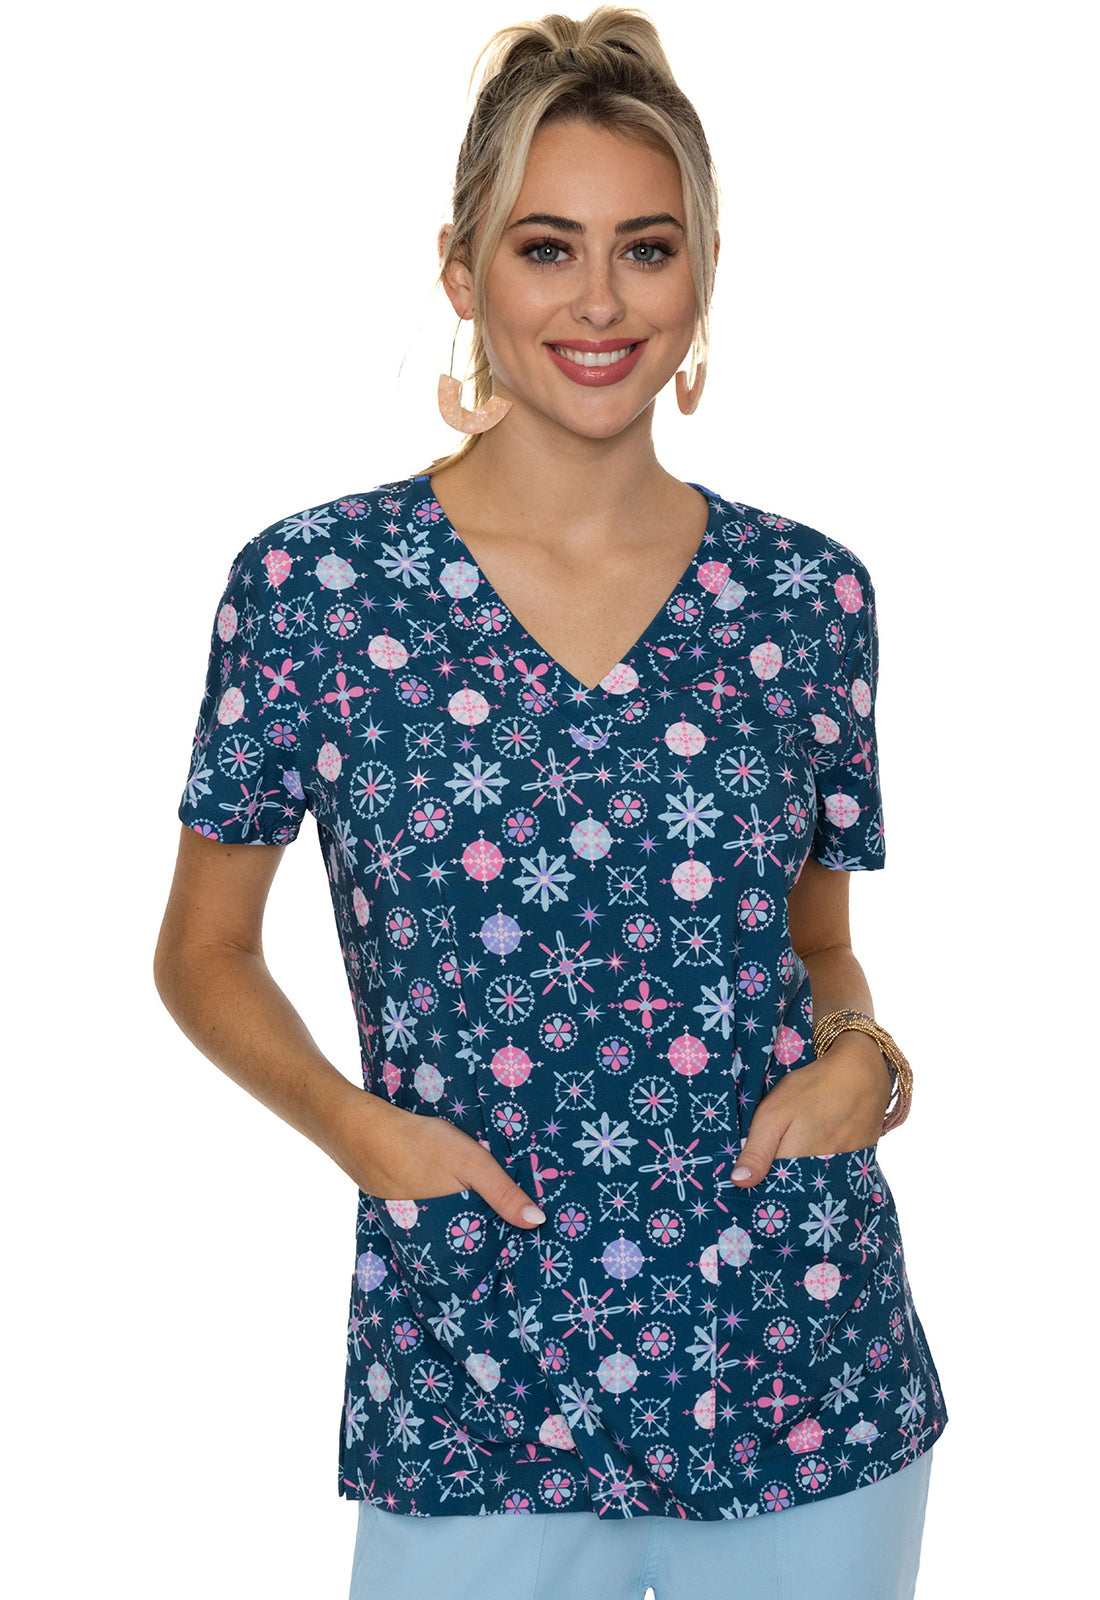 V-Neck Vicky Print Top by Med Couture XS- 3XL   /   Snowflake Scatter